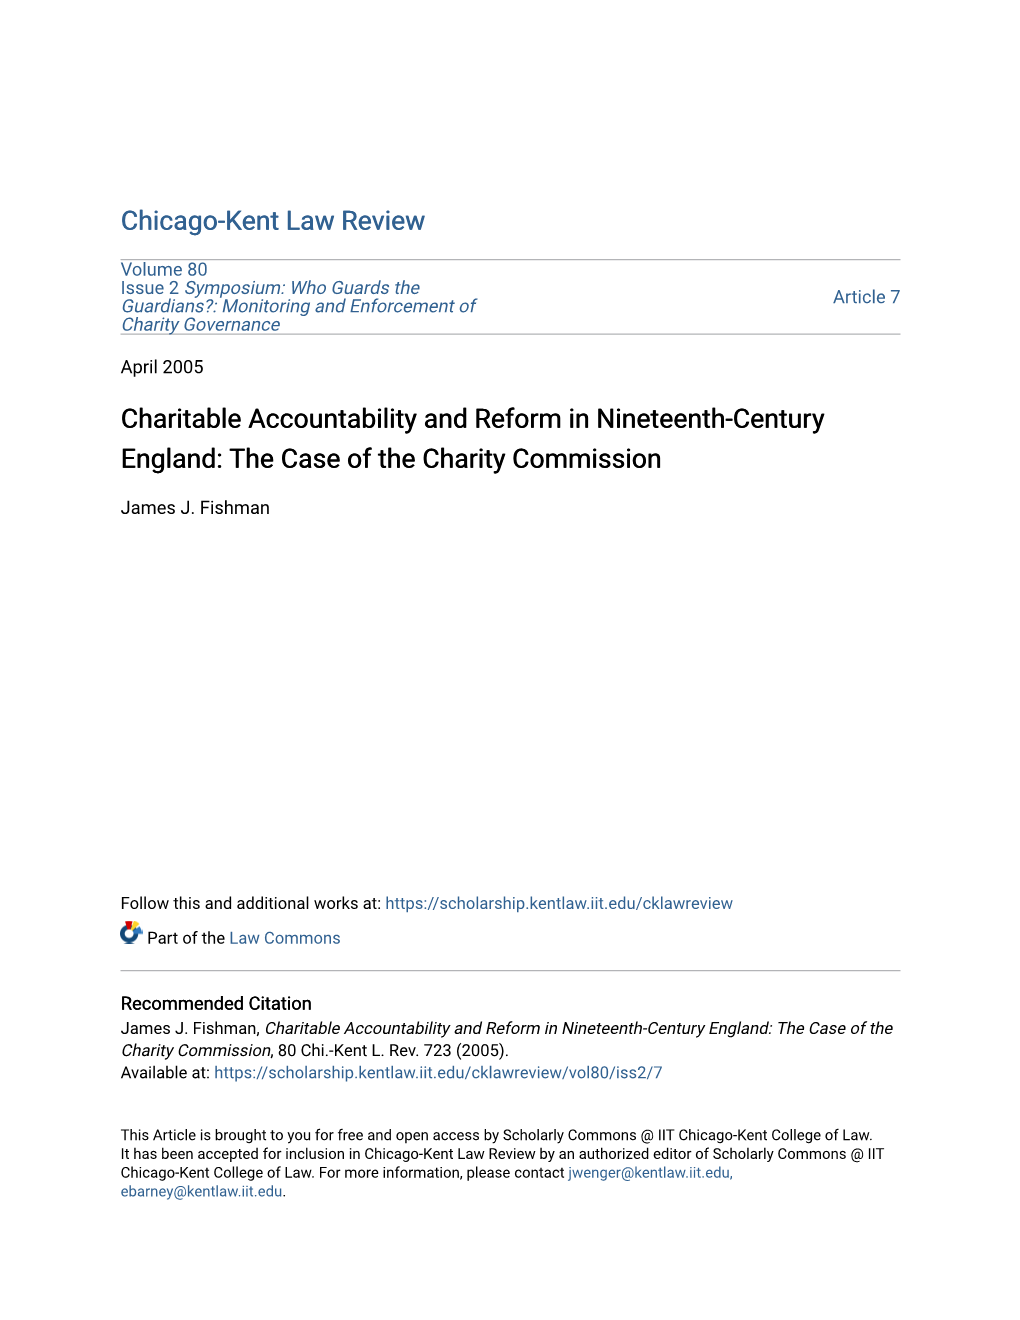 Charitable Accountability and Reform in Nineteenth-Century England: the Case of the Charity Commission